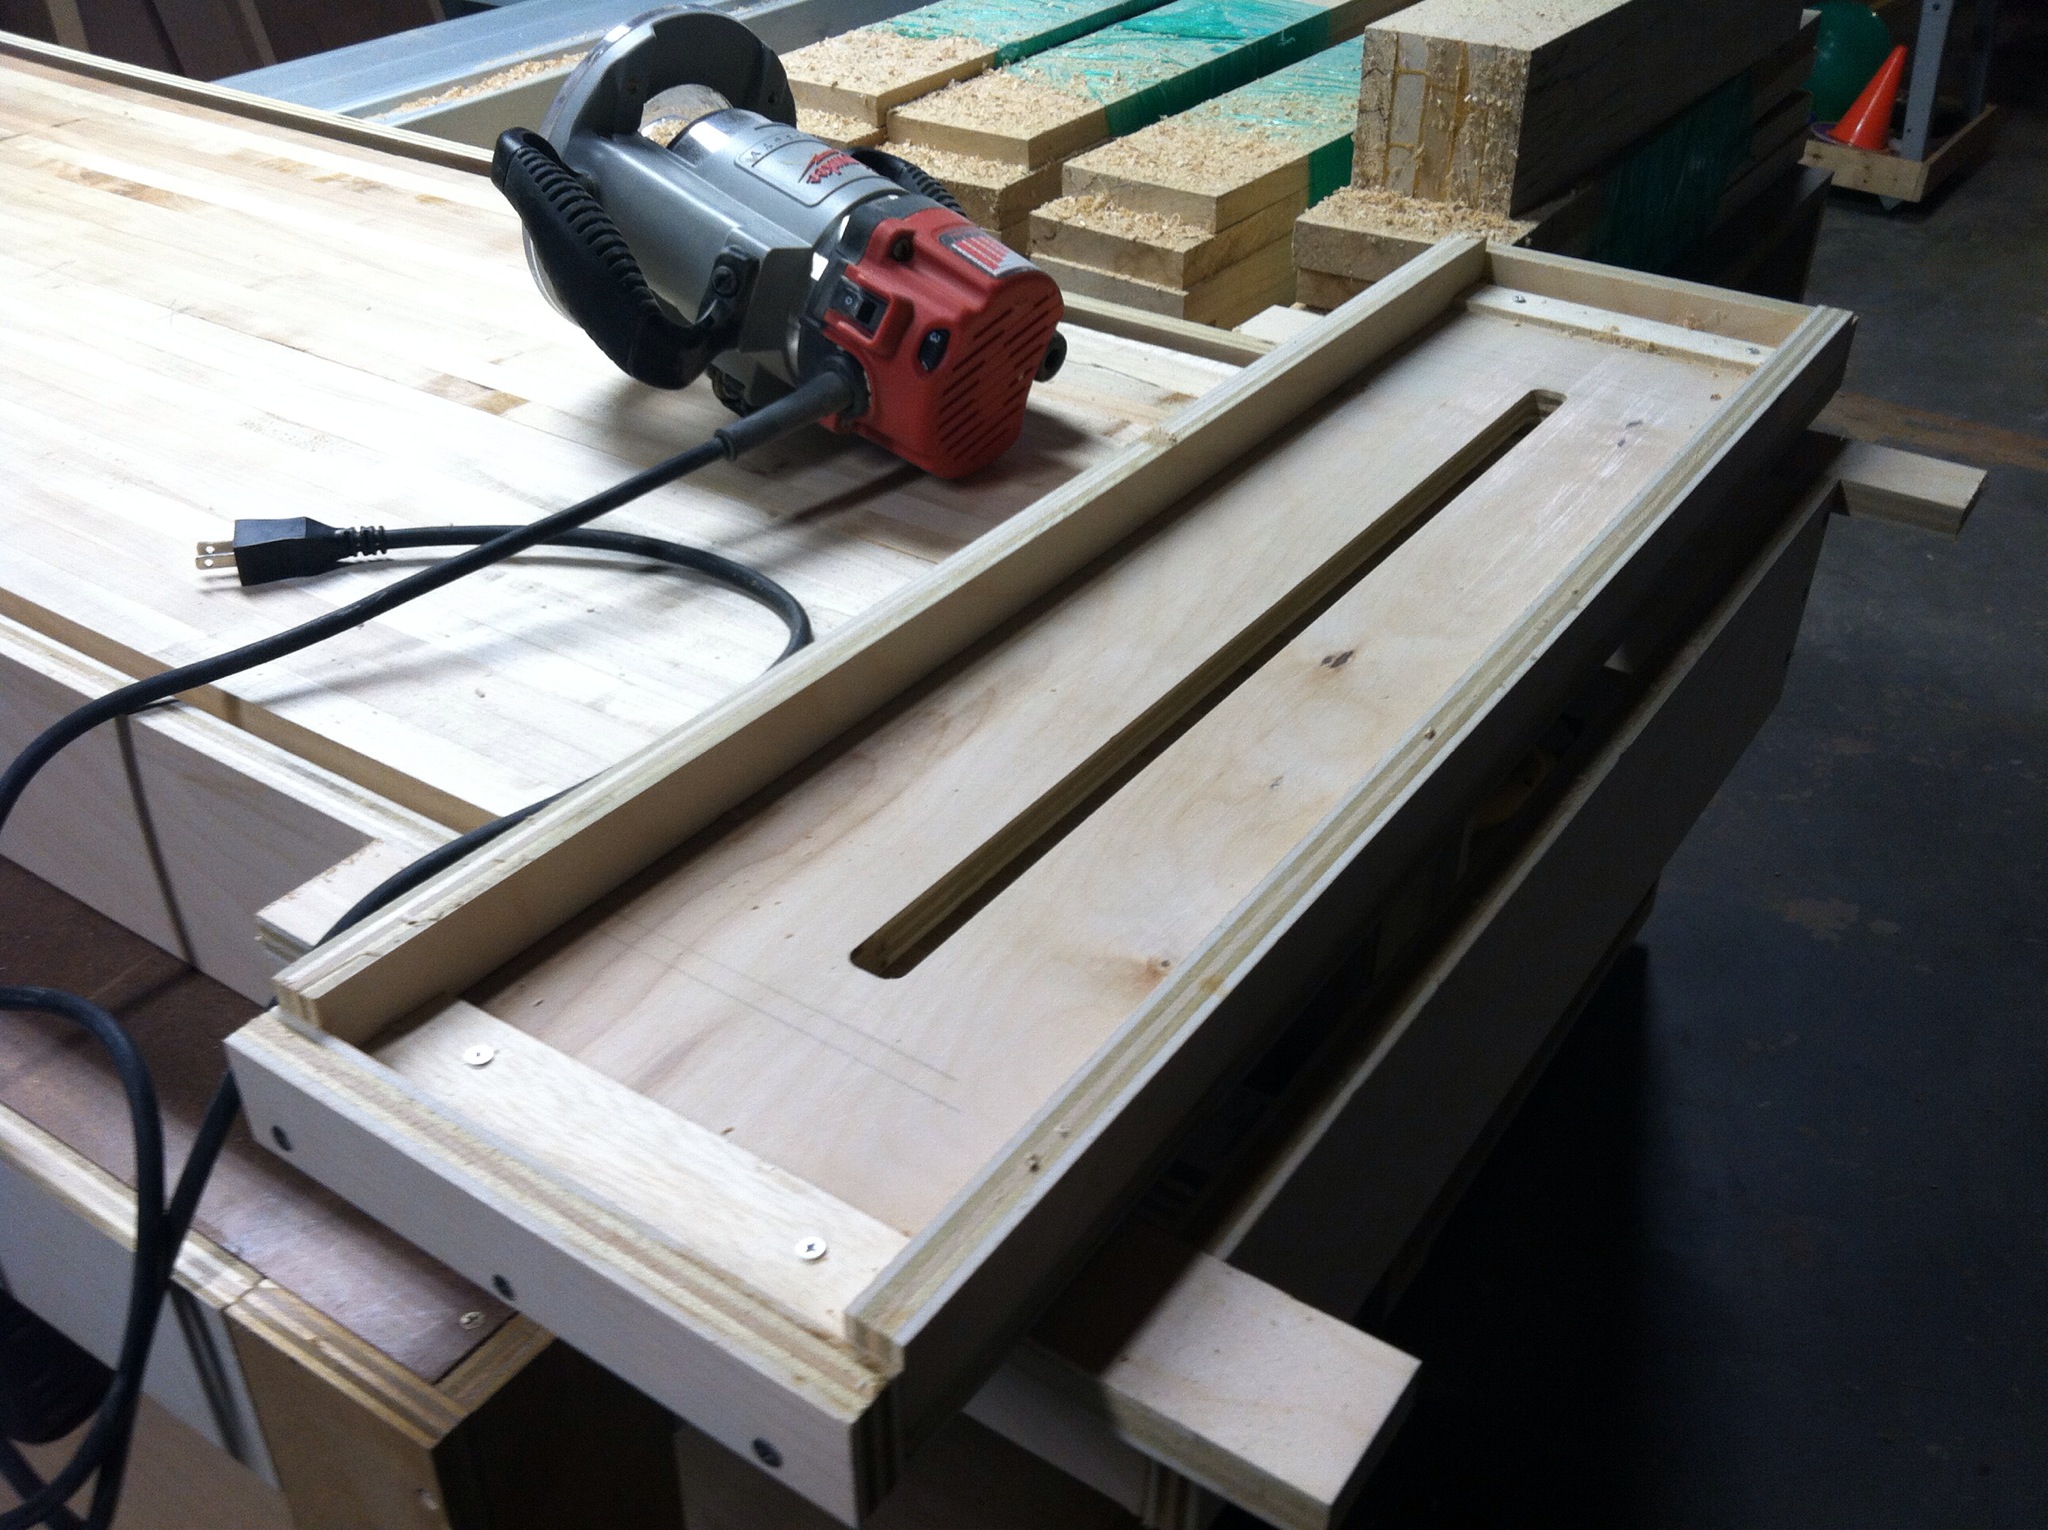 Final router track carefully slotted and guides placed for accurate bench leveling